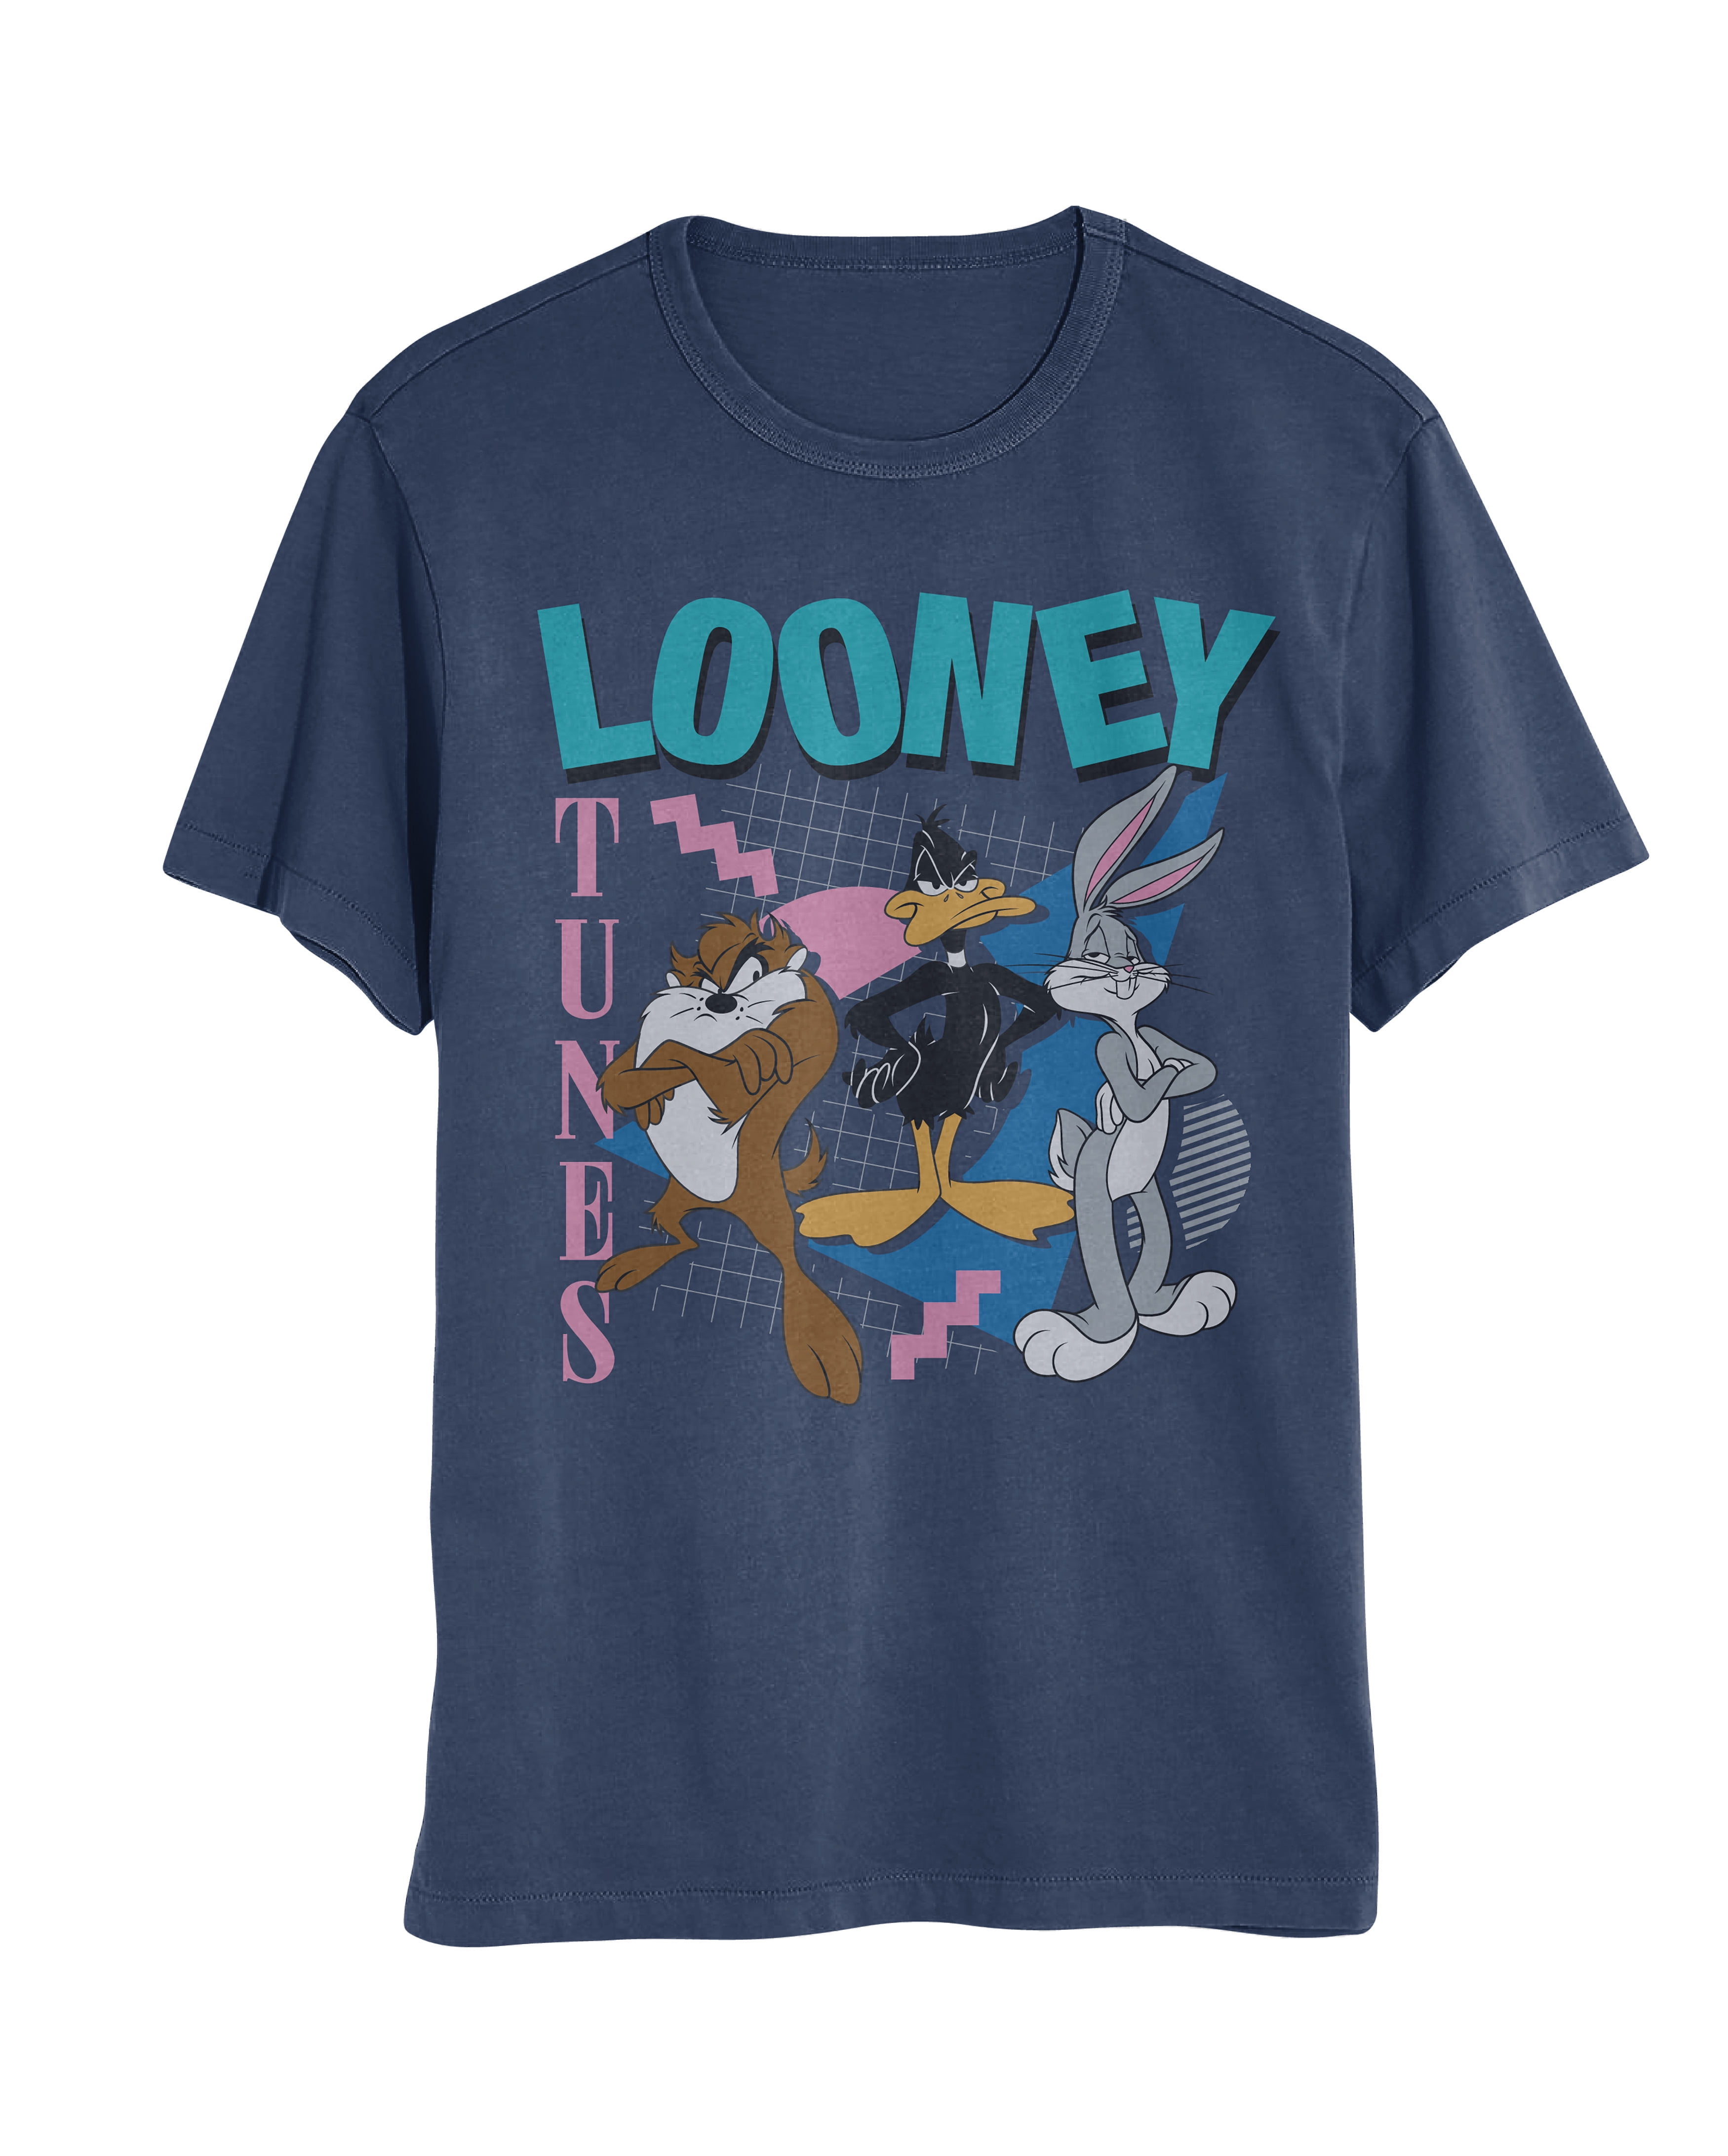 Bunny Tunes Daffy T-Shirt Taz, and Mens Looney Bugs Womens S-XXL) Short (White, Sleeve and